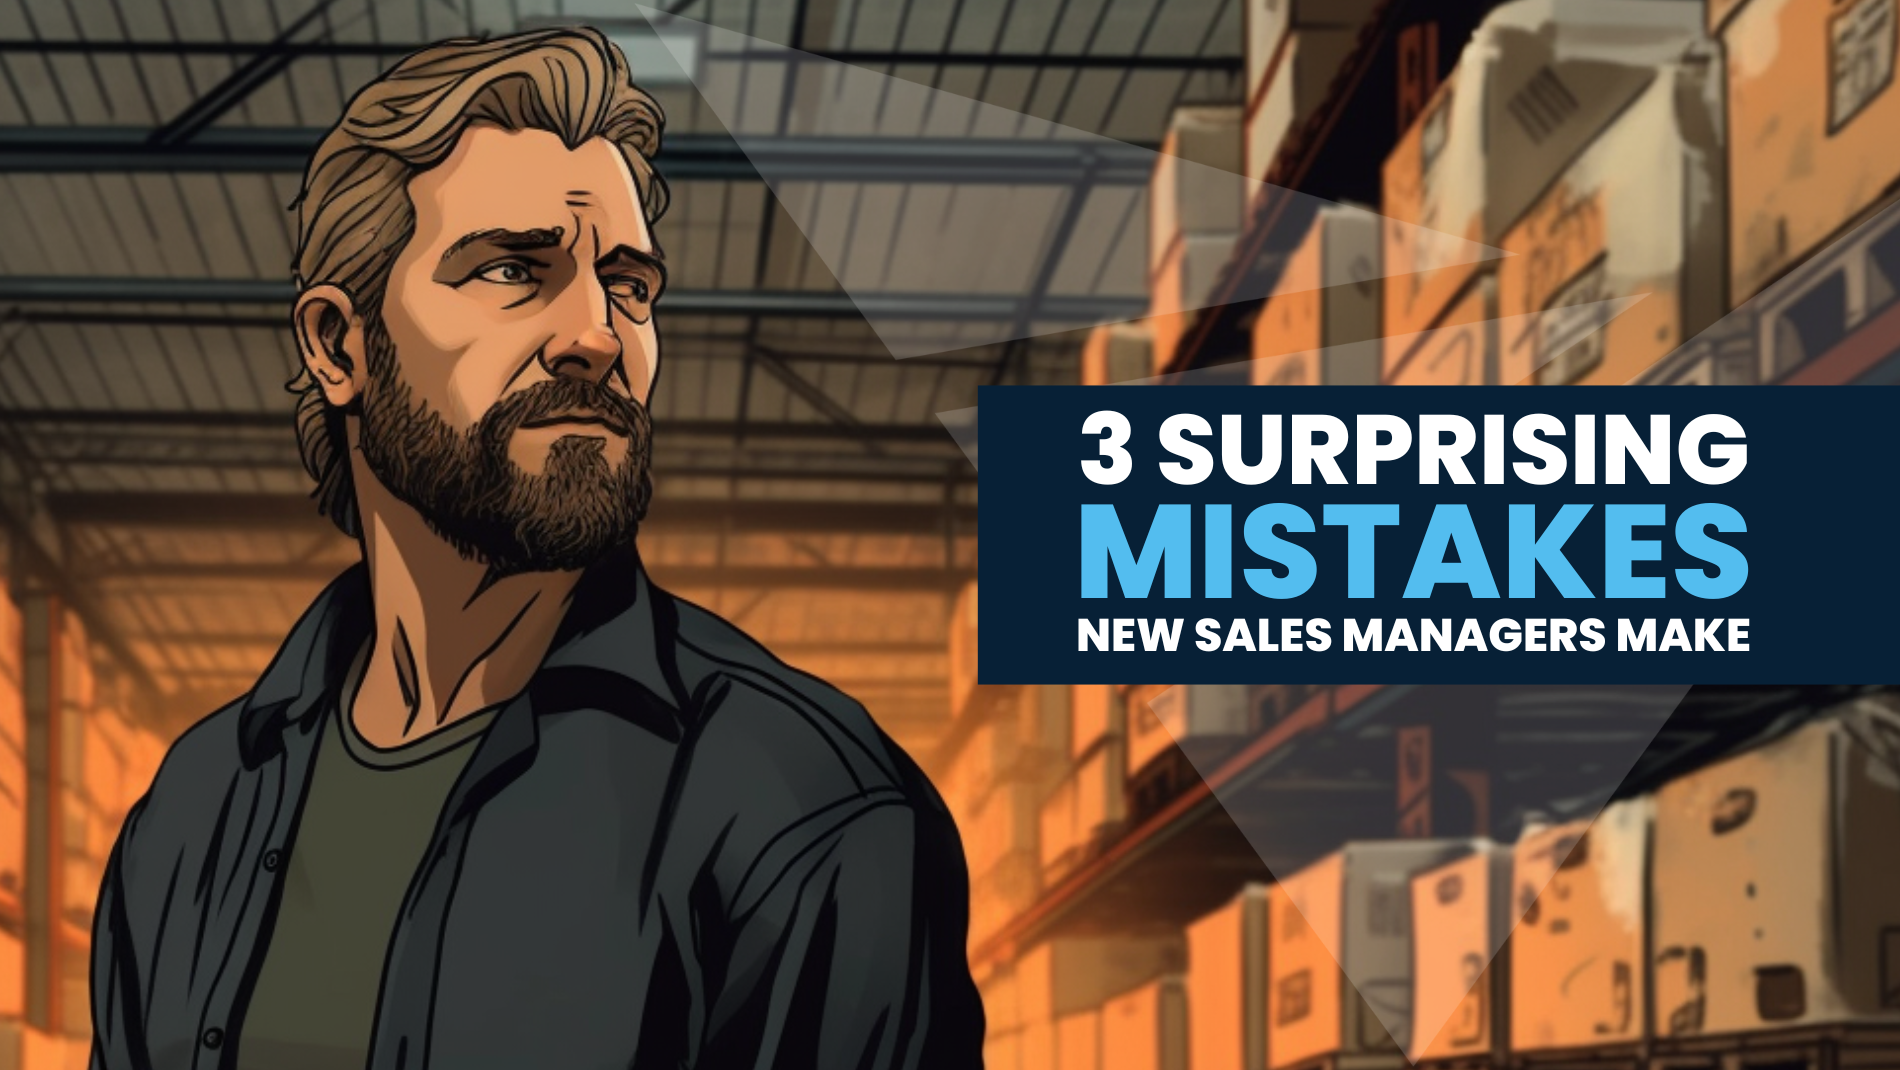 3 Surprising Mistakes New Sales Managers Make and How to Avoid Them